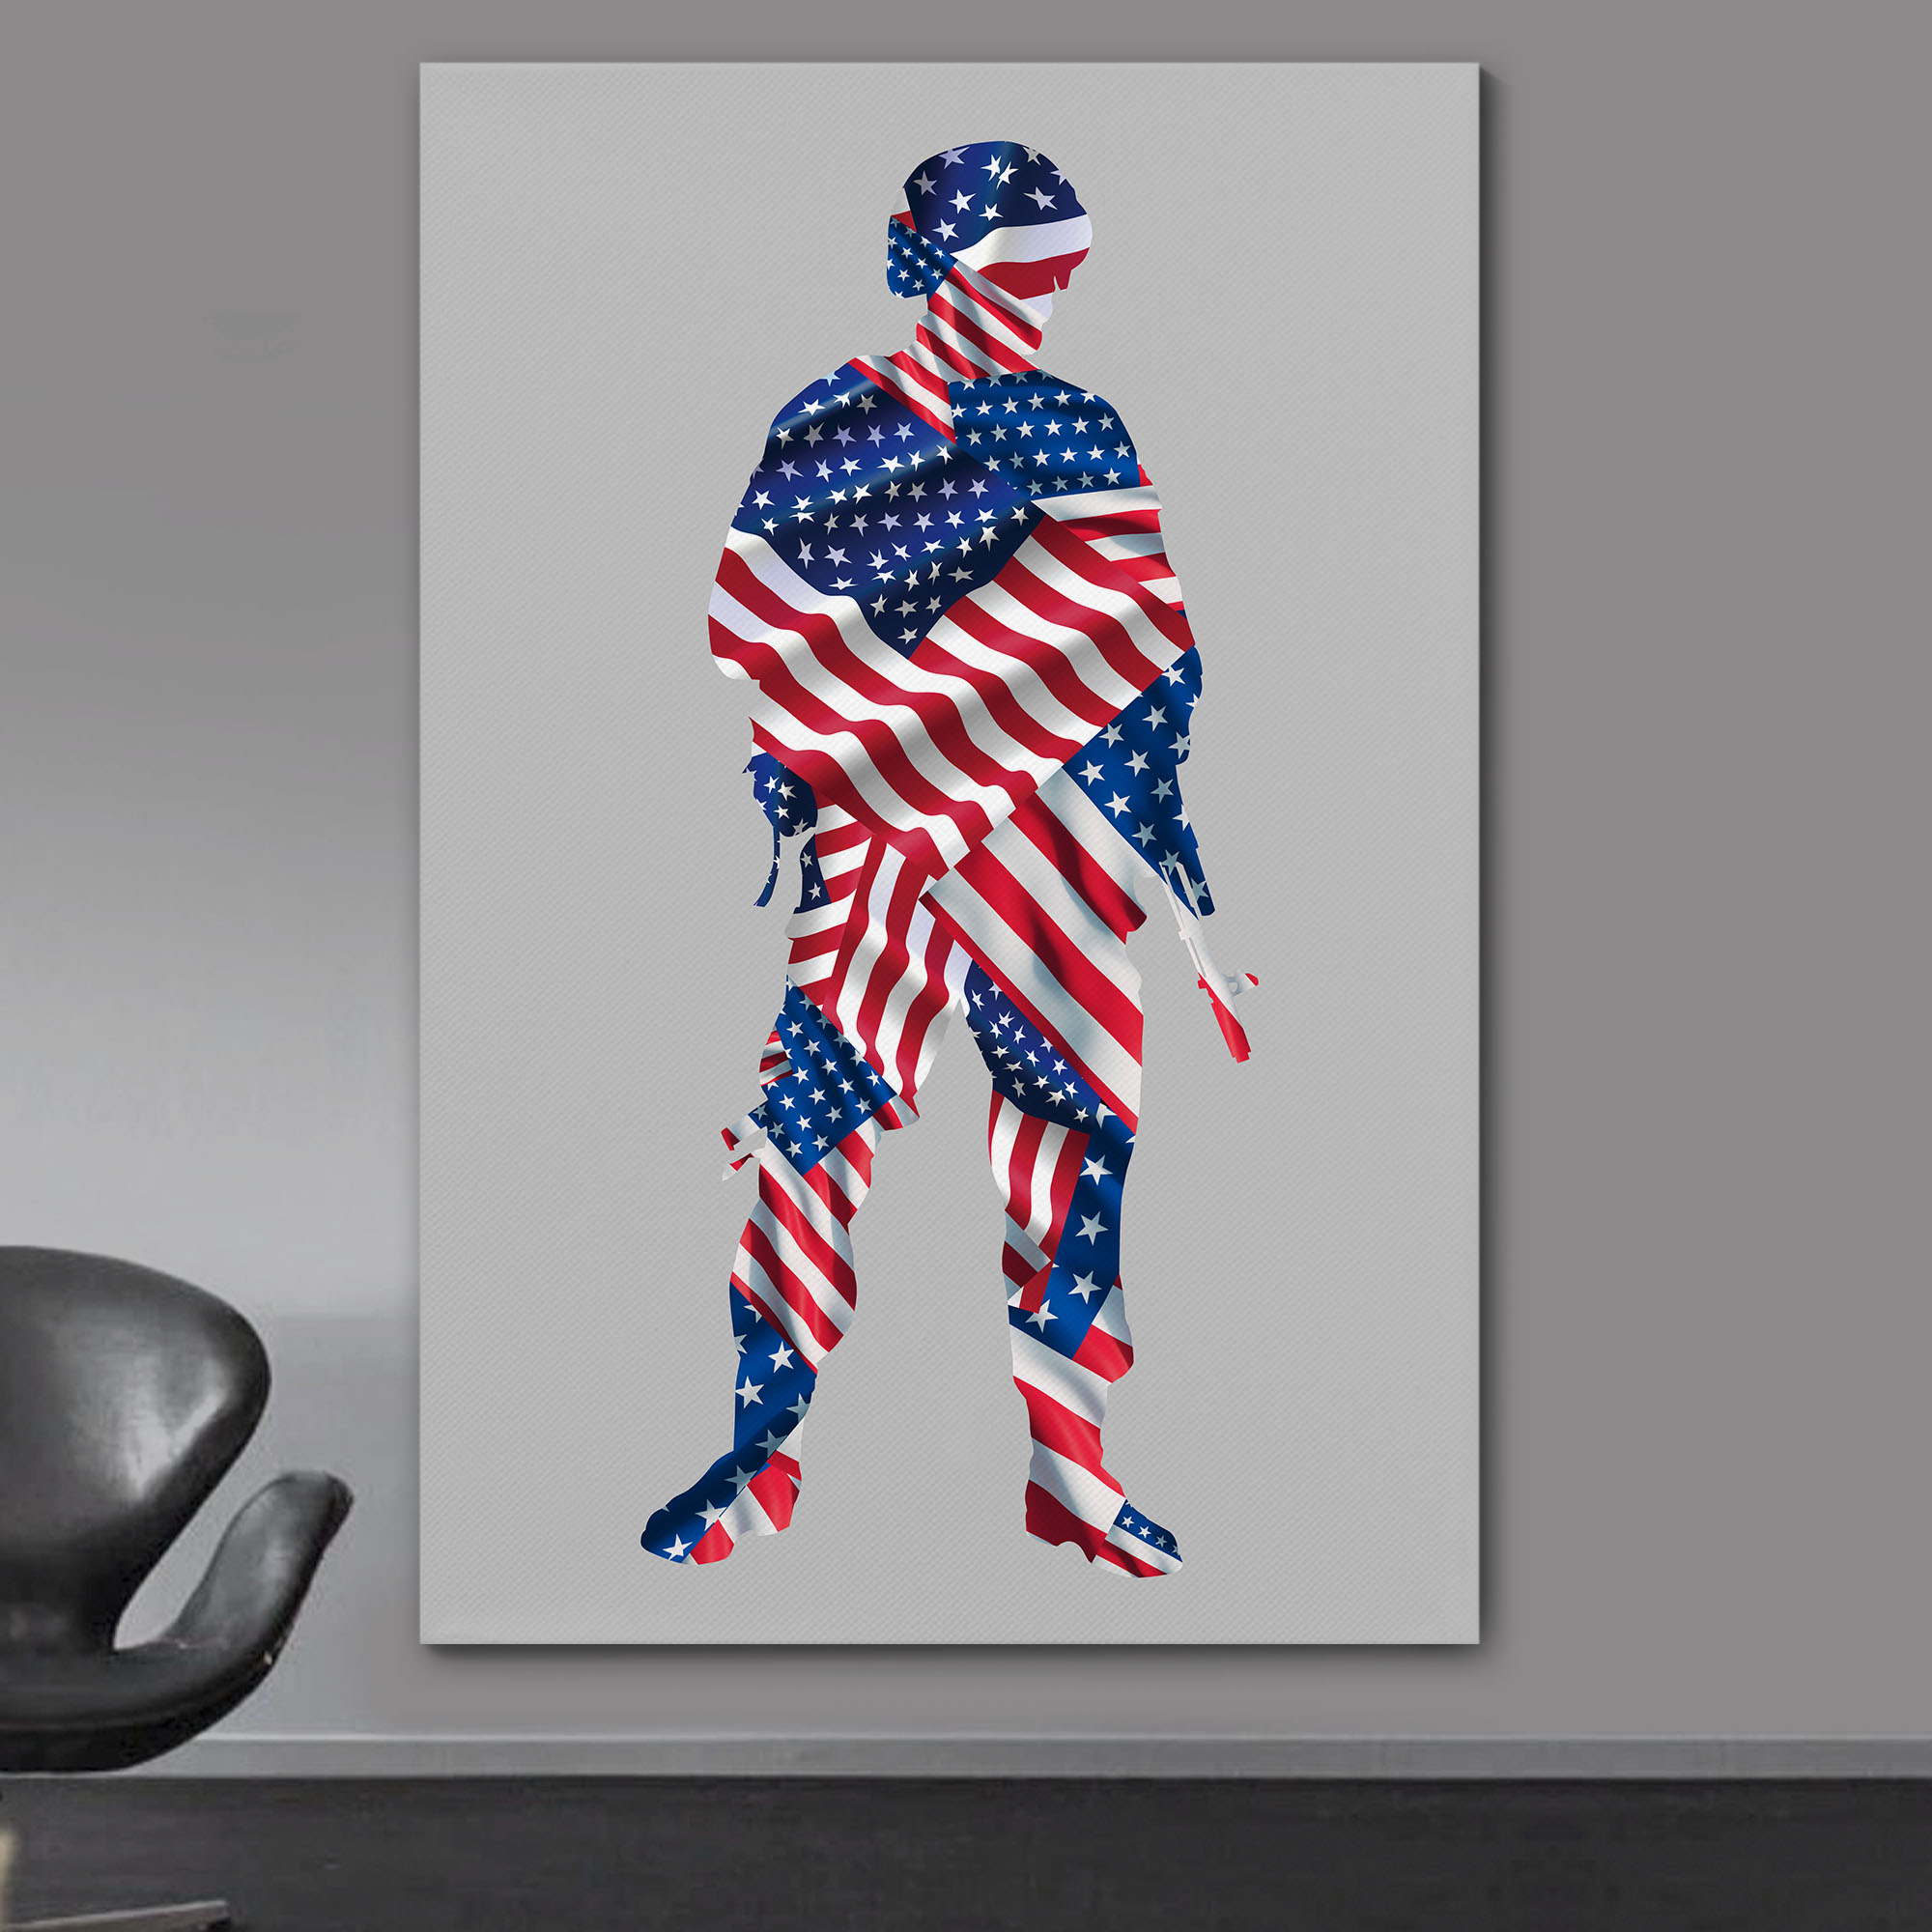 Military Family Canvas Wall Art - Soldier with Gun on American Flag Background - Gallery Wrap Modern Home Decor | Ready to Hang - 32x48 inches